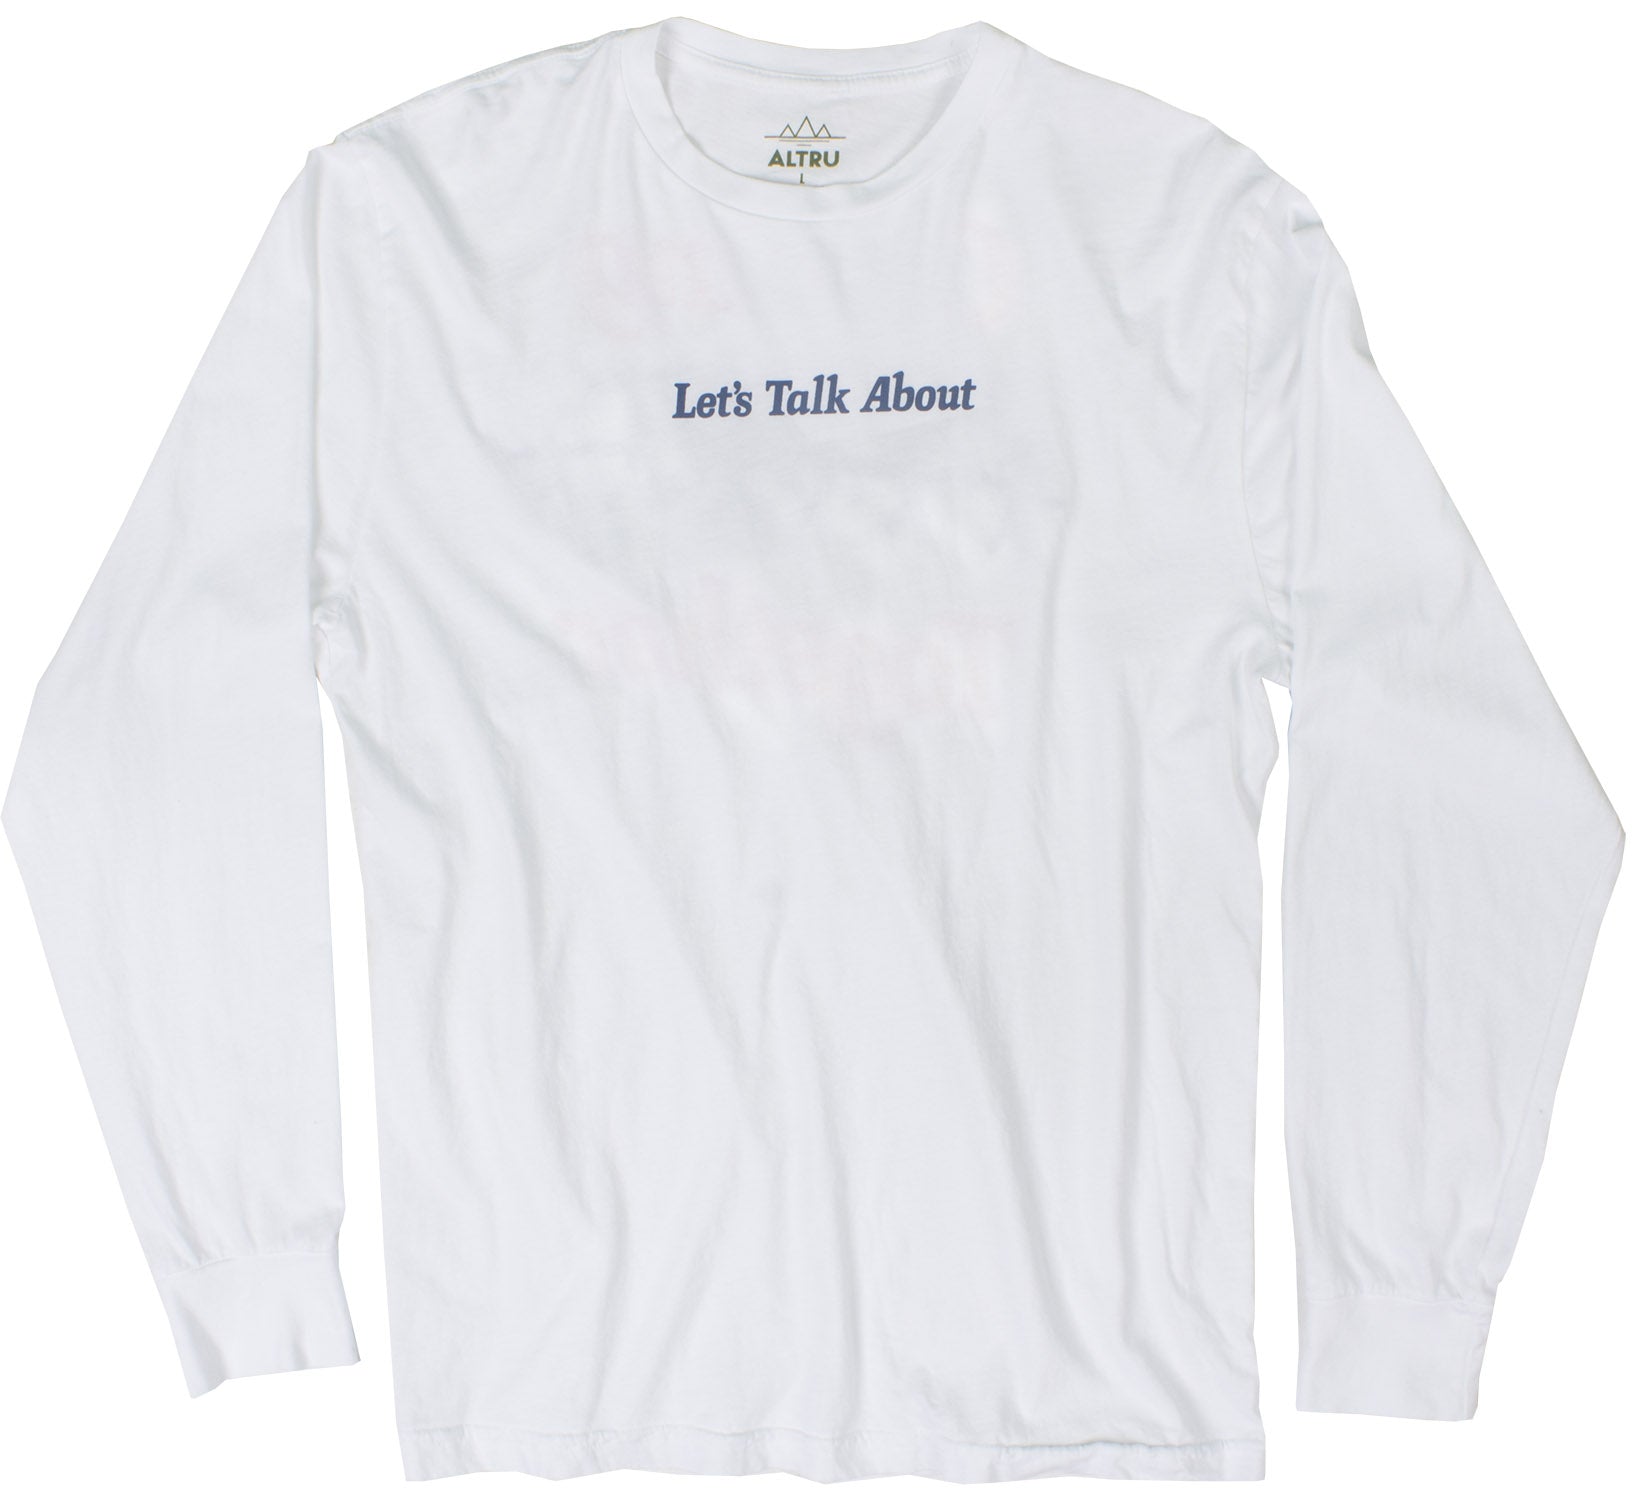 Coming Together Lets Talk L/S white front and back printed graphic tee